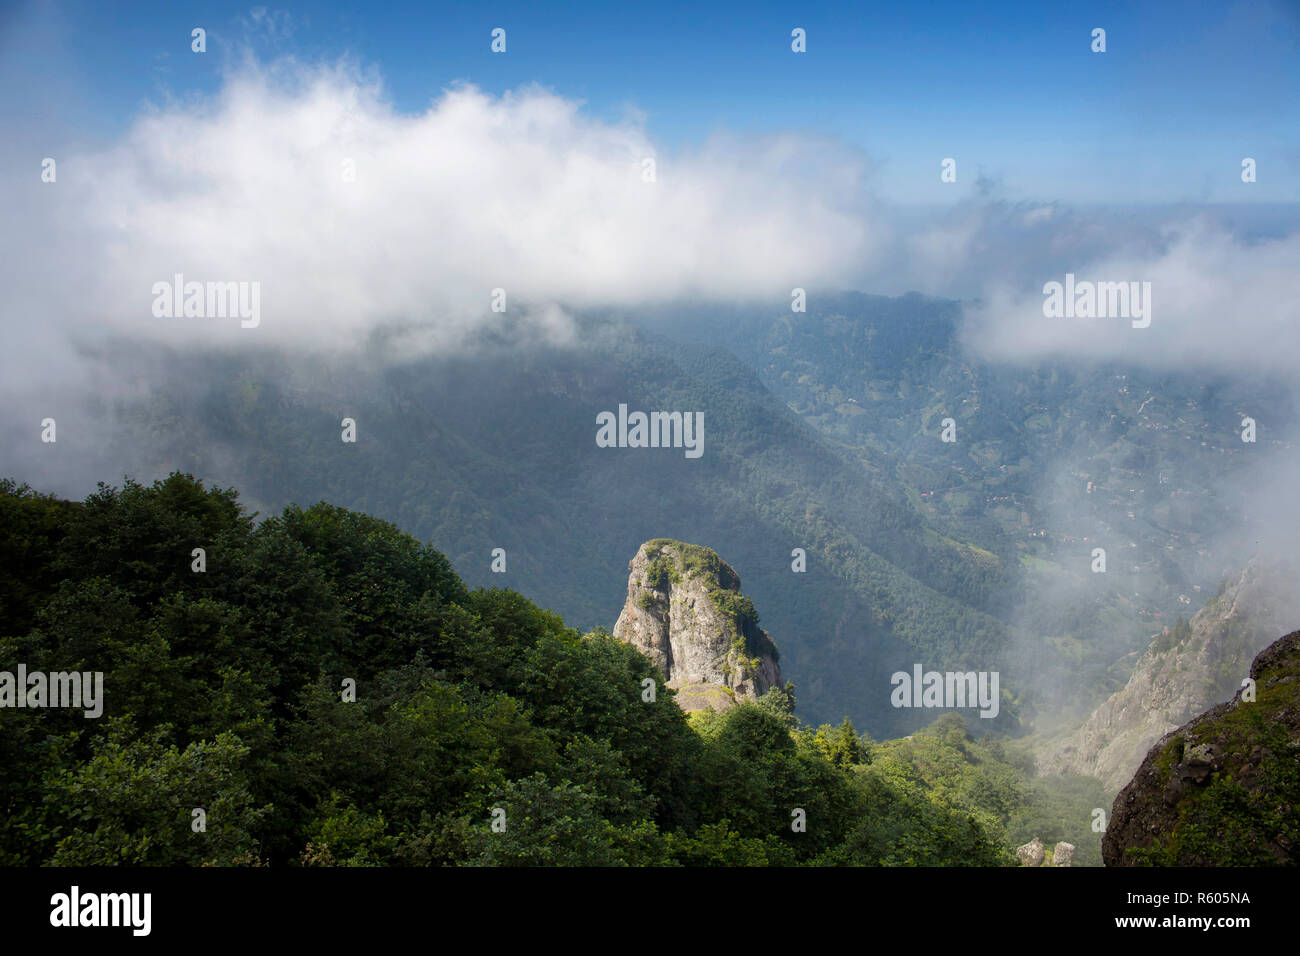 View of mountains, forests, valleys in fog creating beautiful nature scene. The image is captured in Trabzon/Rize area of Black Sea region located at  Stock Photo